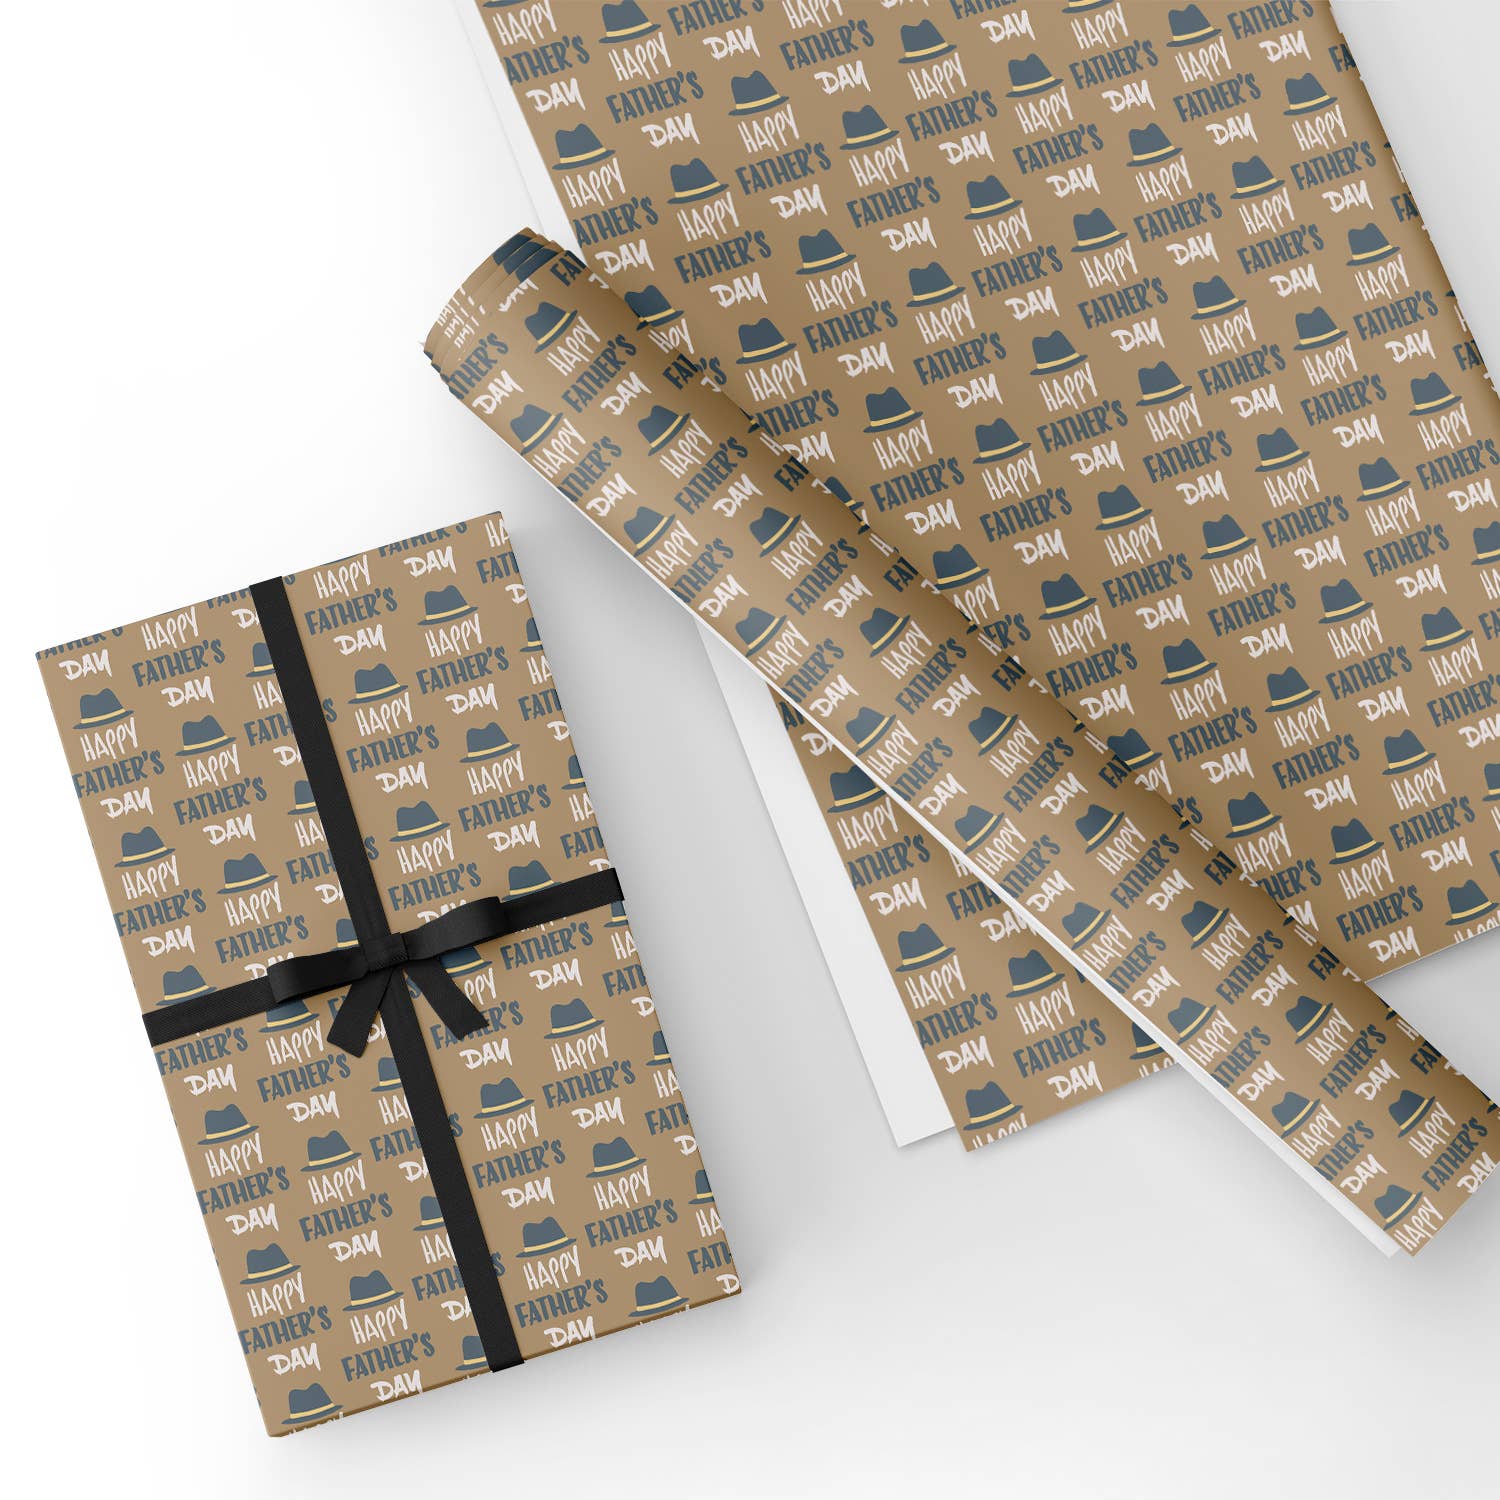 Father's Day Brown Flat Wrapping Paper Sheet Wholesale Wraphaholic